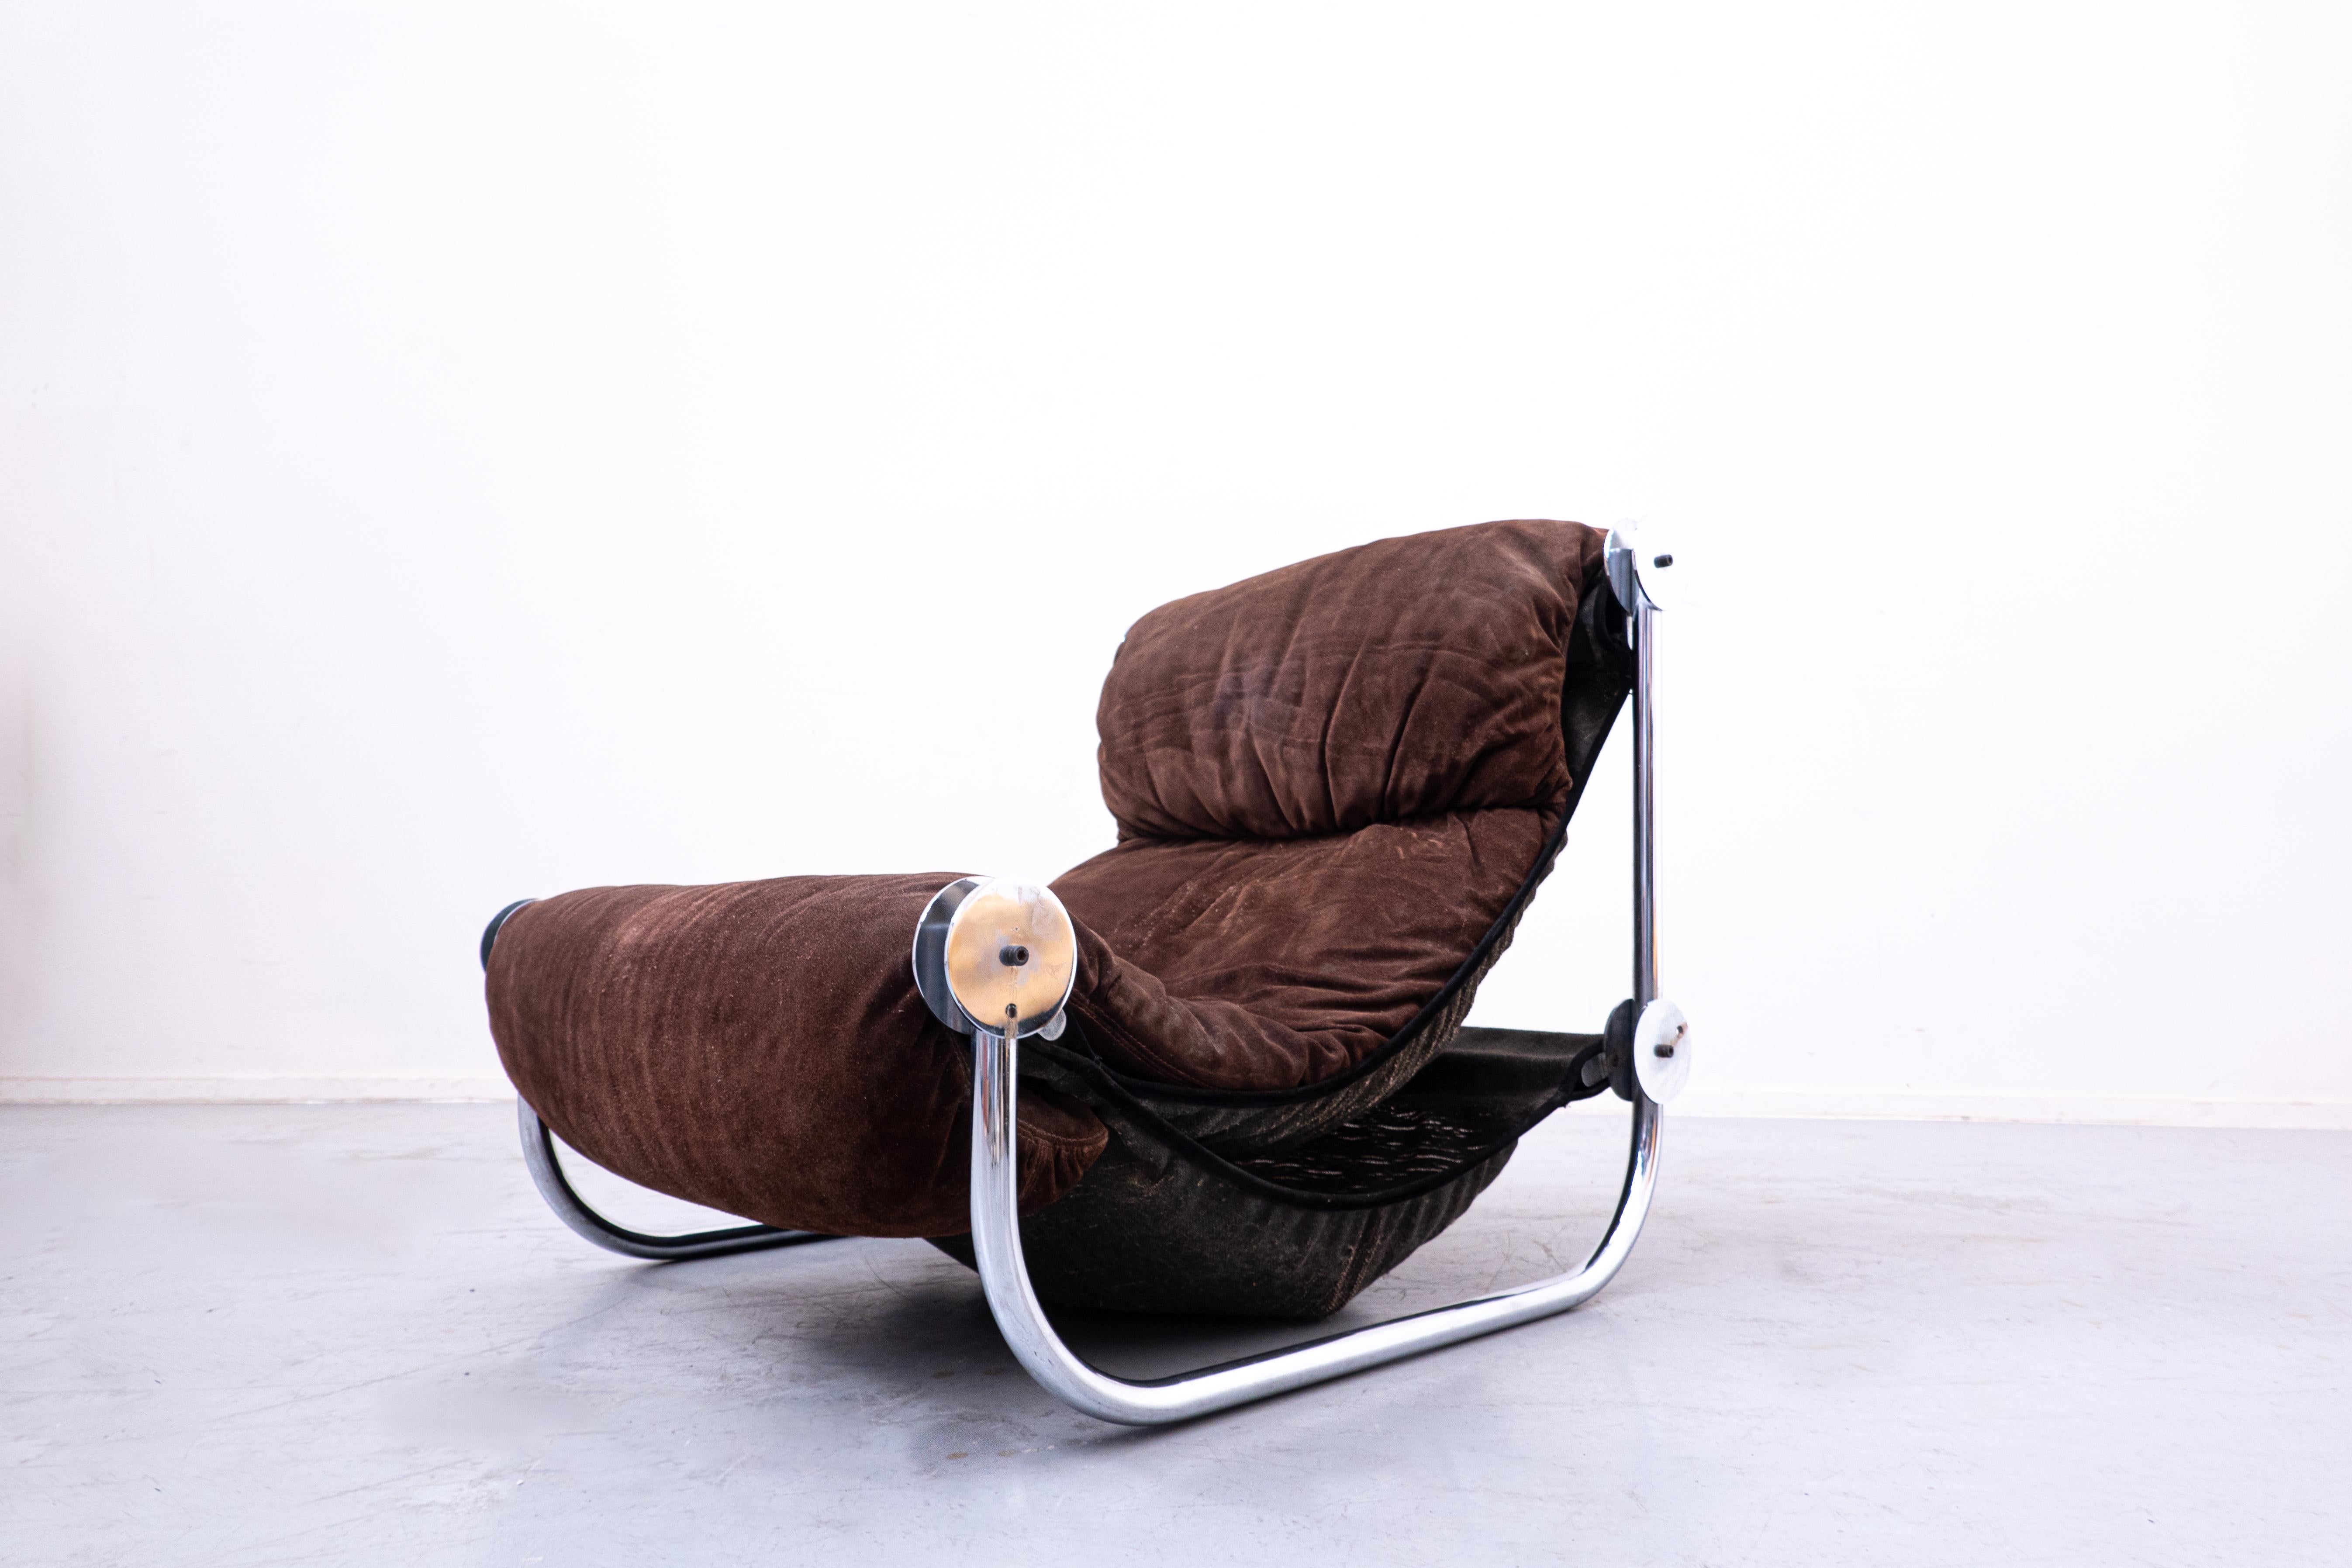 Mid-Century Modern Italian chrome and suede lounge chair, brown, 1960s.